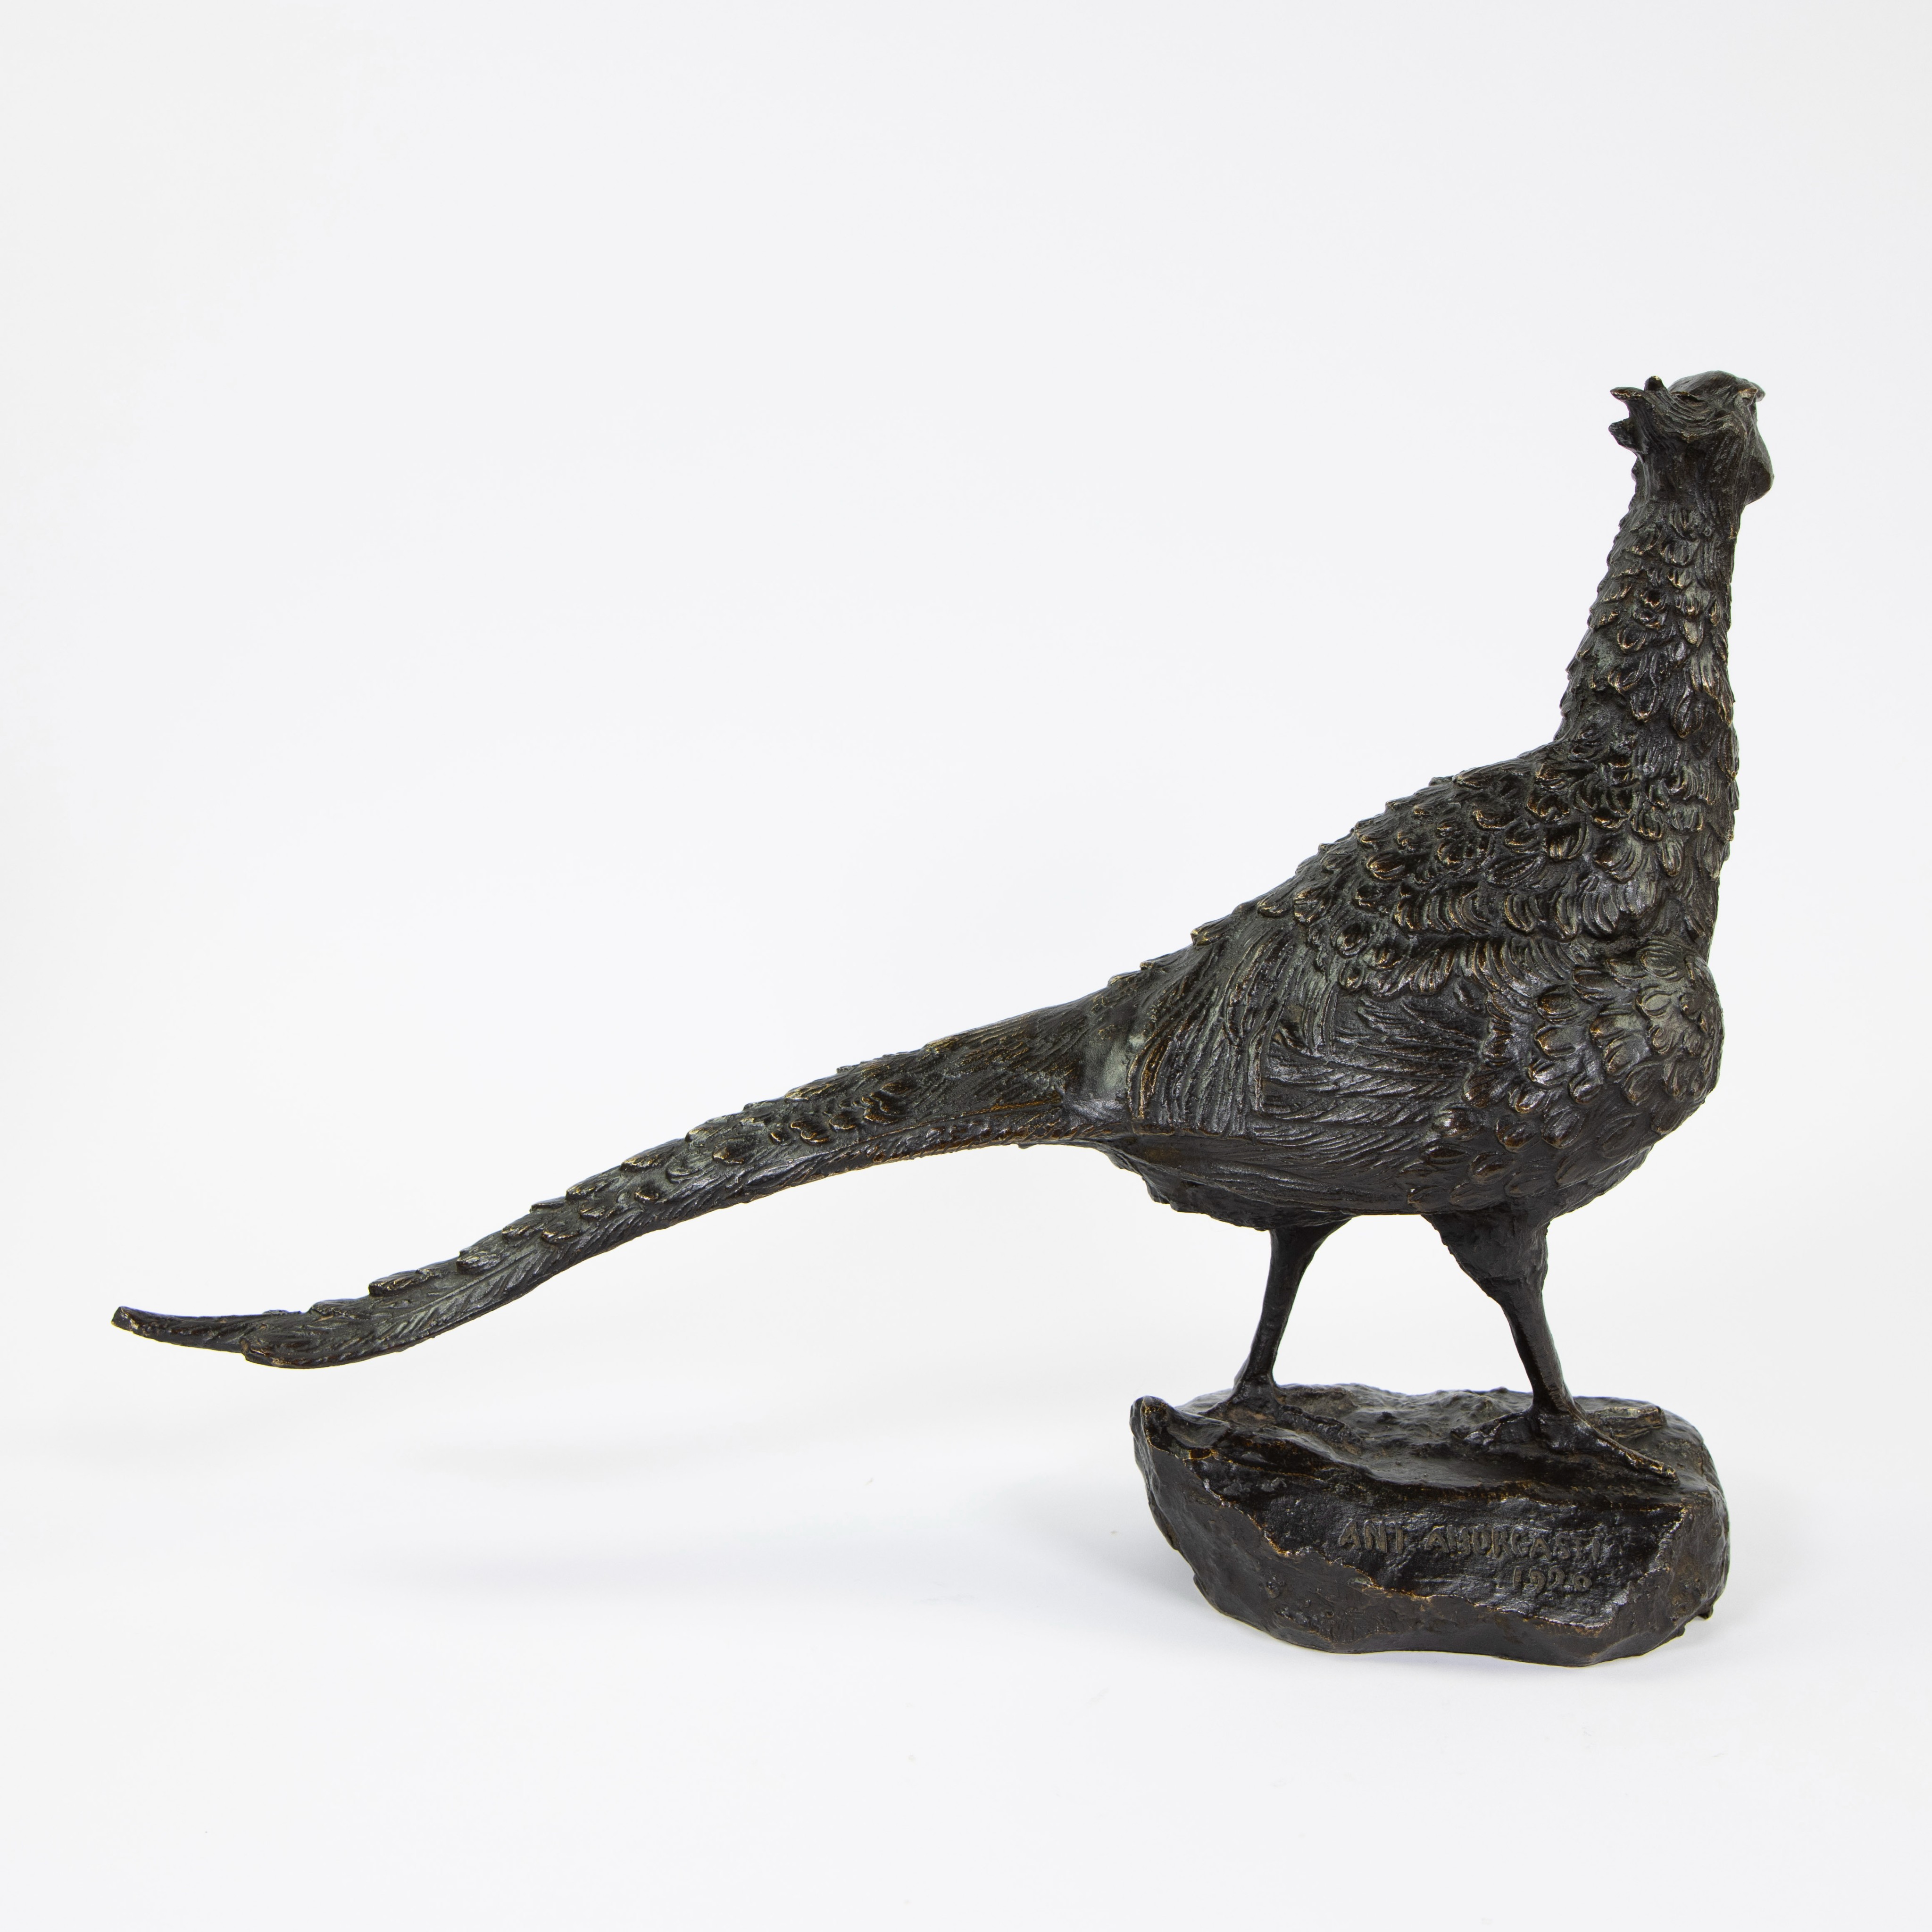 Antonio AMORGASTI (1880-1942), patinated and partly gilt bronze pheasant, signed and dated 1920. - Image 5 of 6